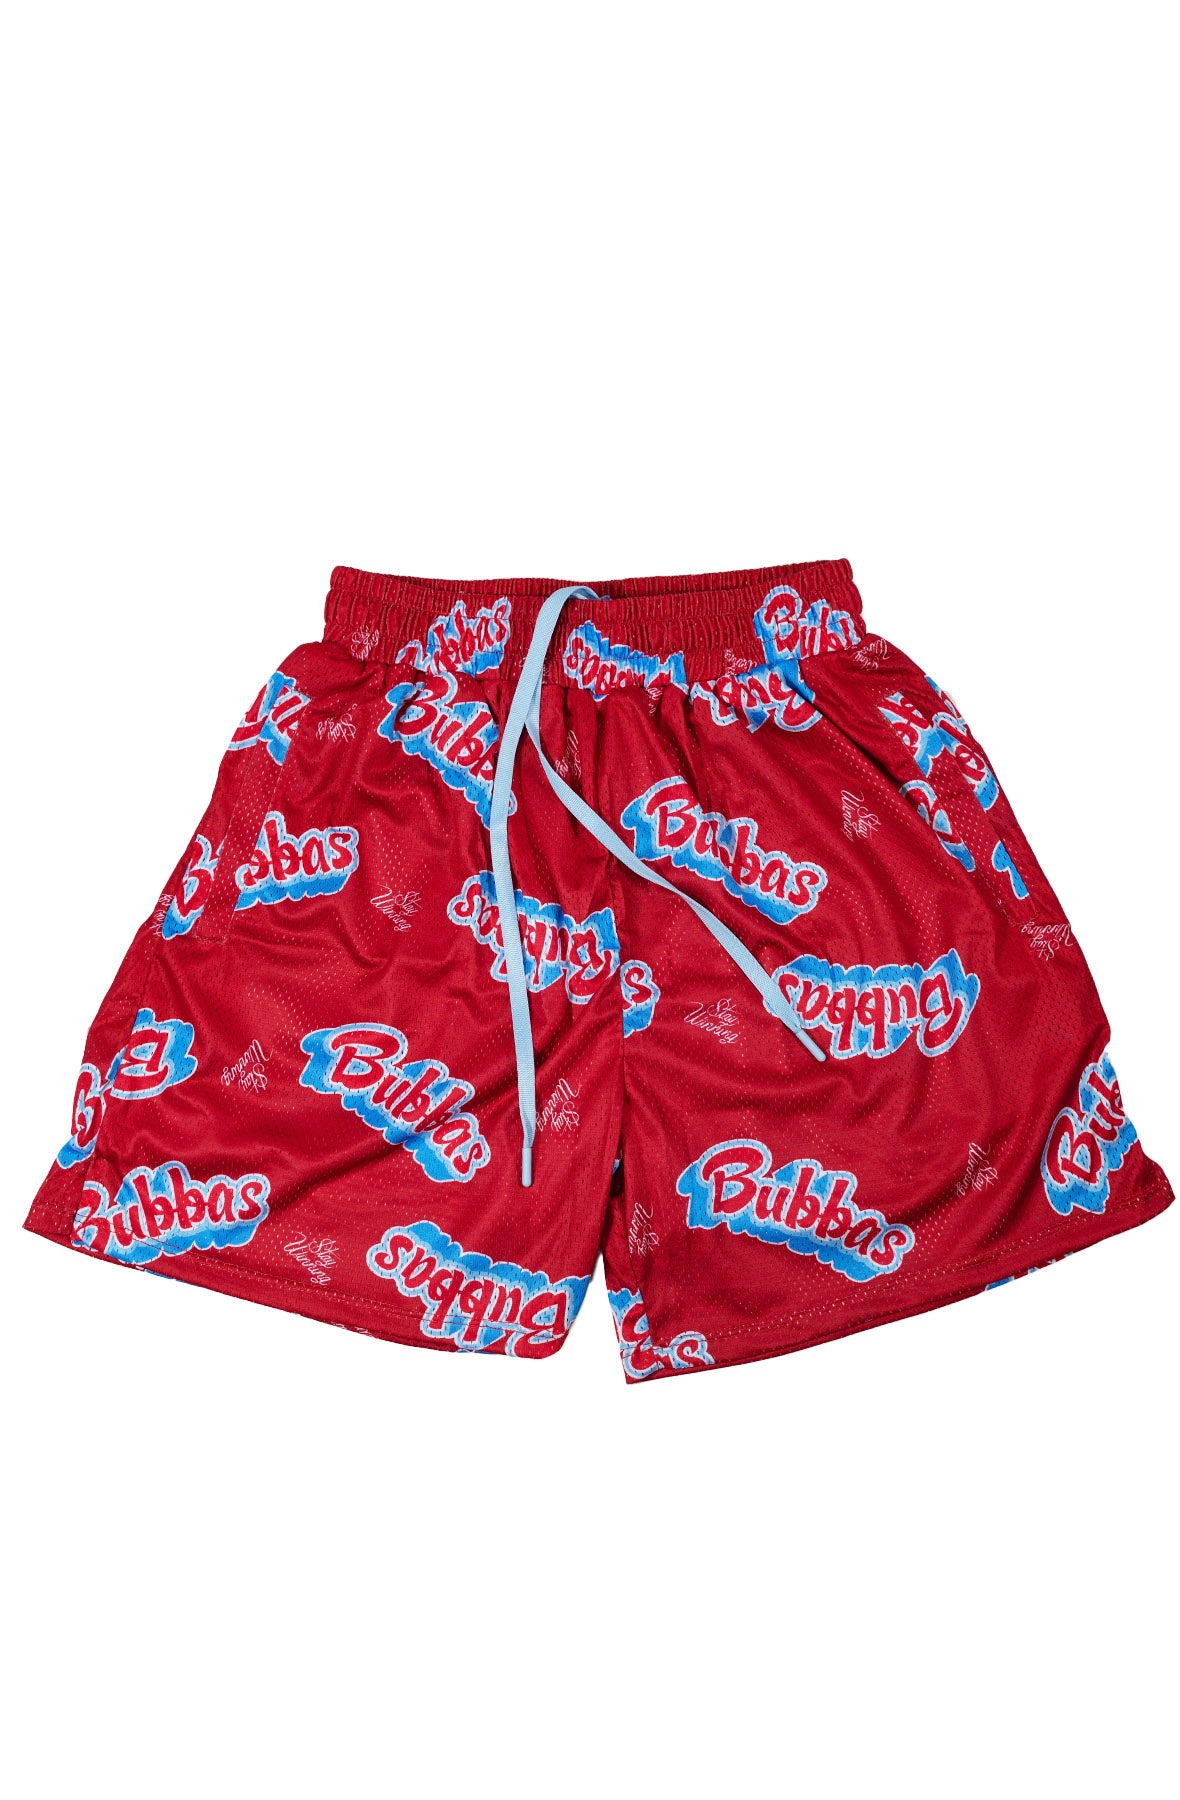 Stay Winning Red All Over Bubbas Hoop Shorts – STAY WINNING